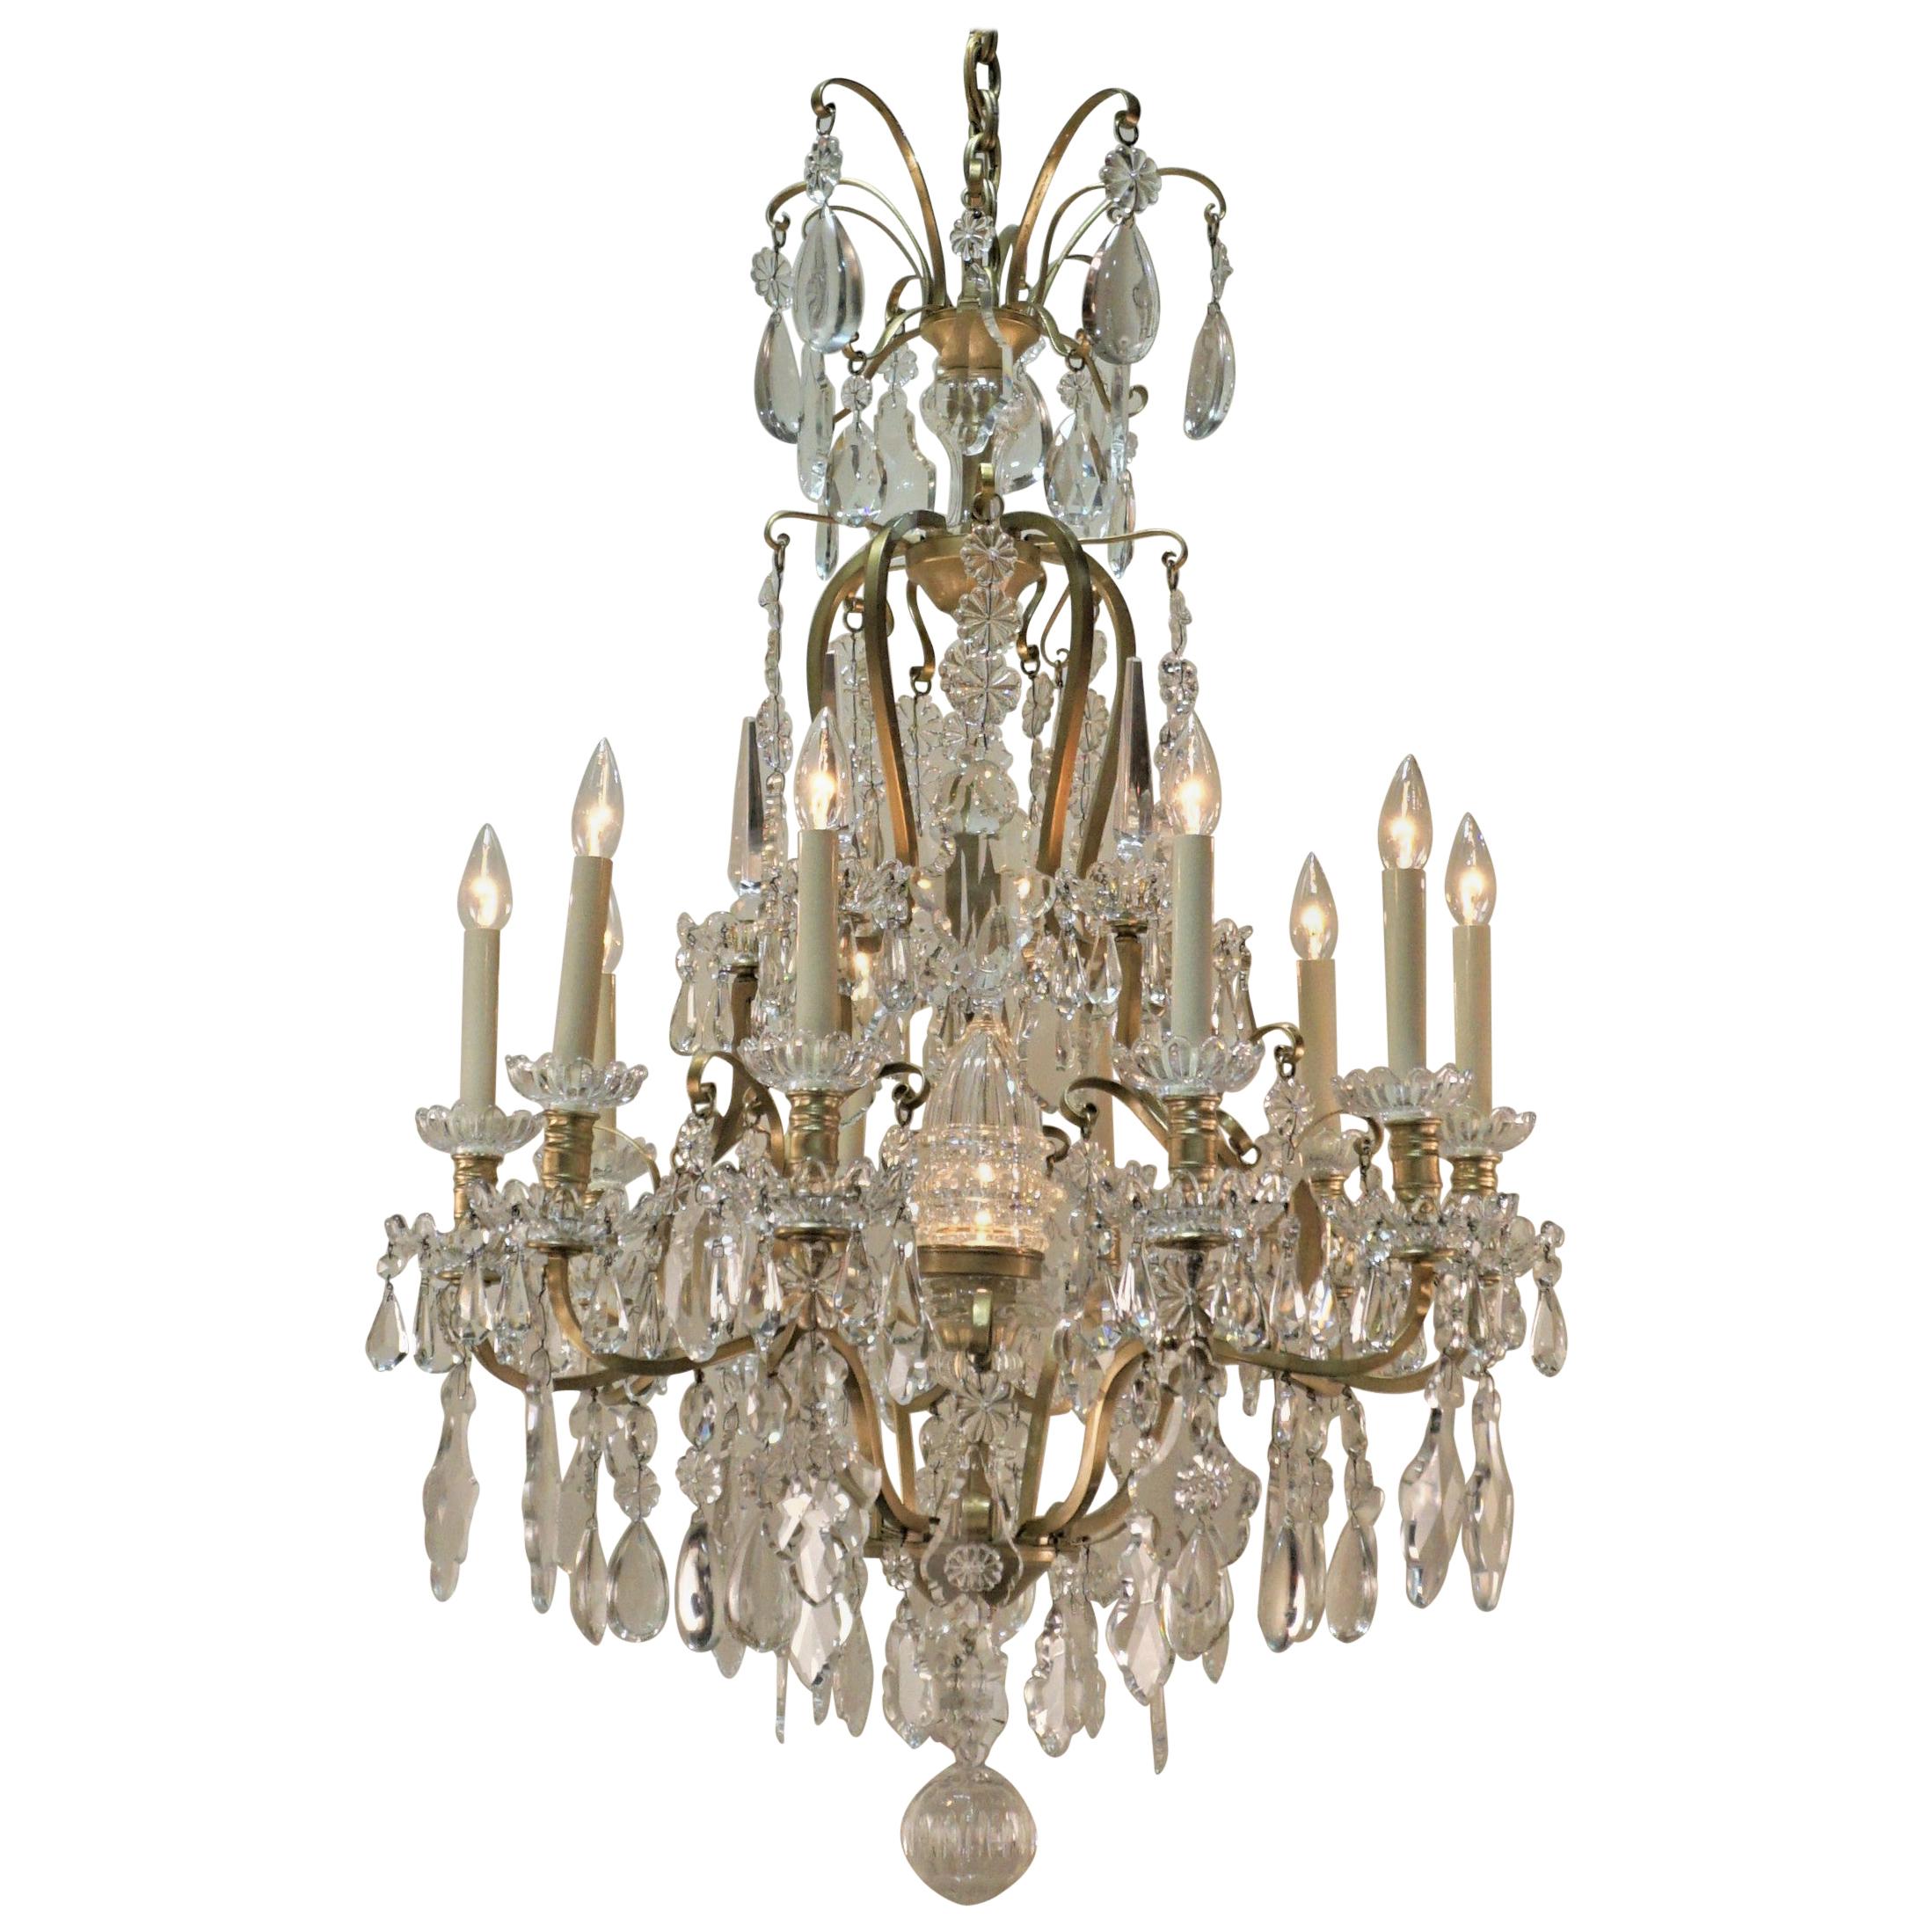  Early 20th Century Baccarat Crystal and Bronze Chandelier 